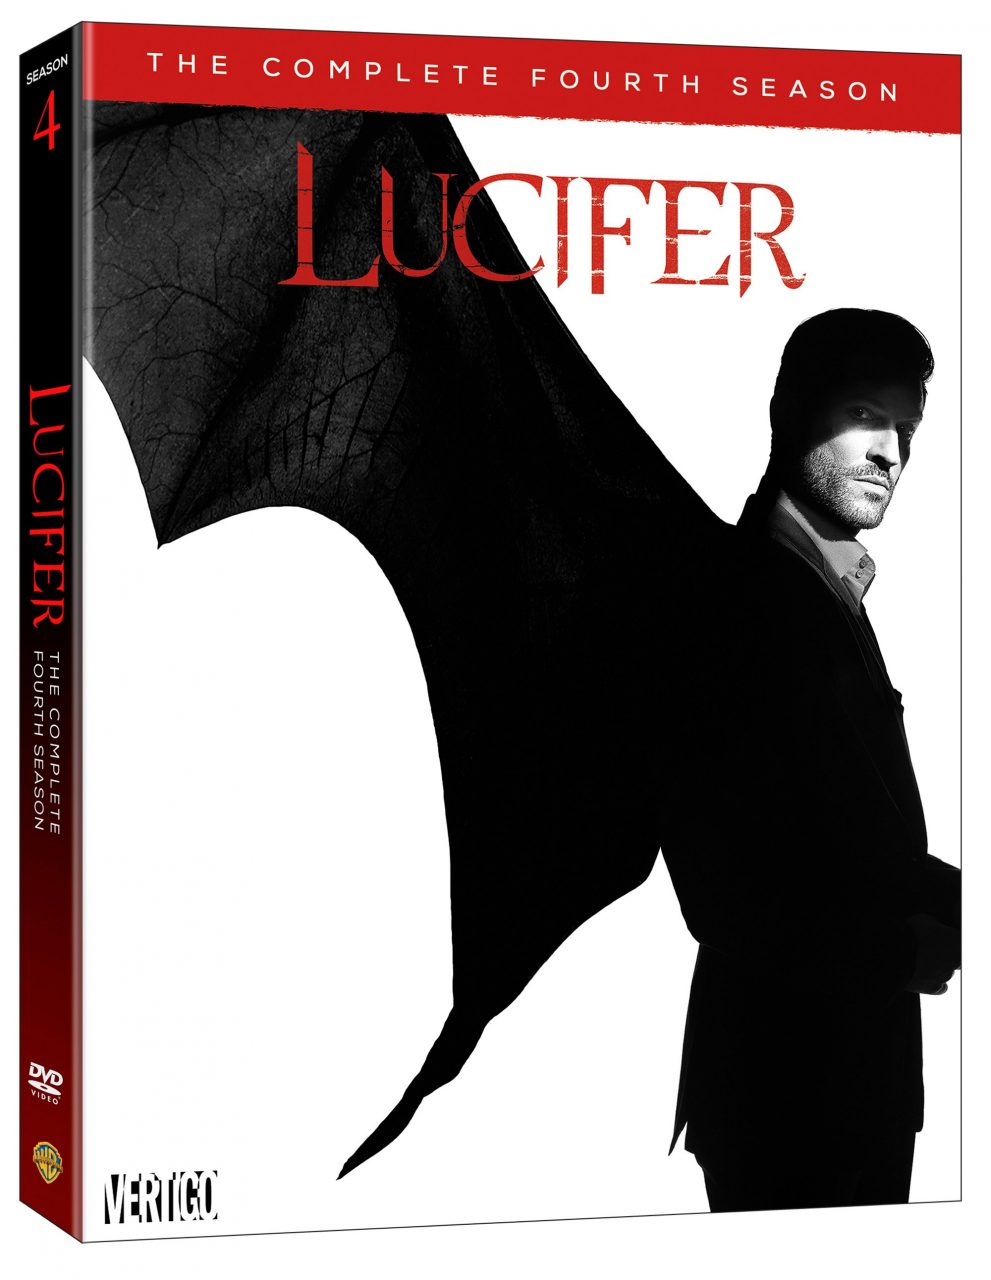 Lucifer: The Complete Fourth Season DVD cover (Warner Bros. Home Entertainment)